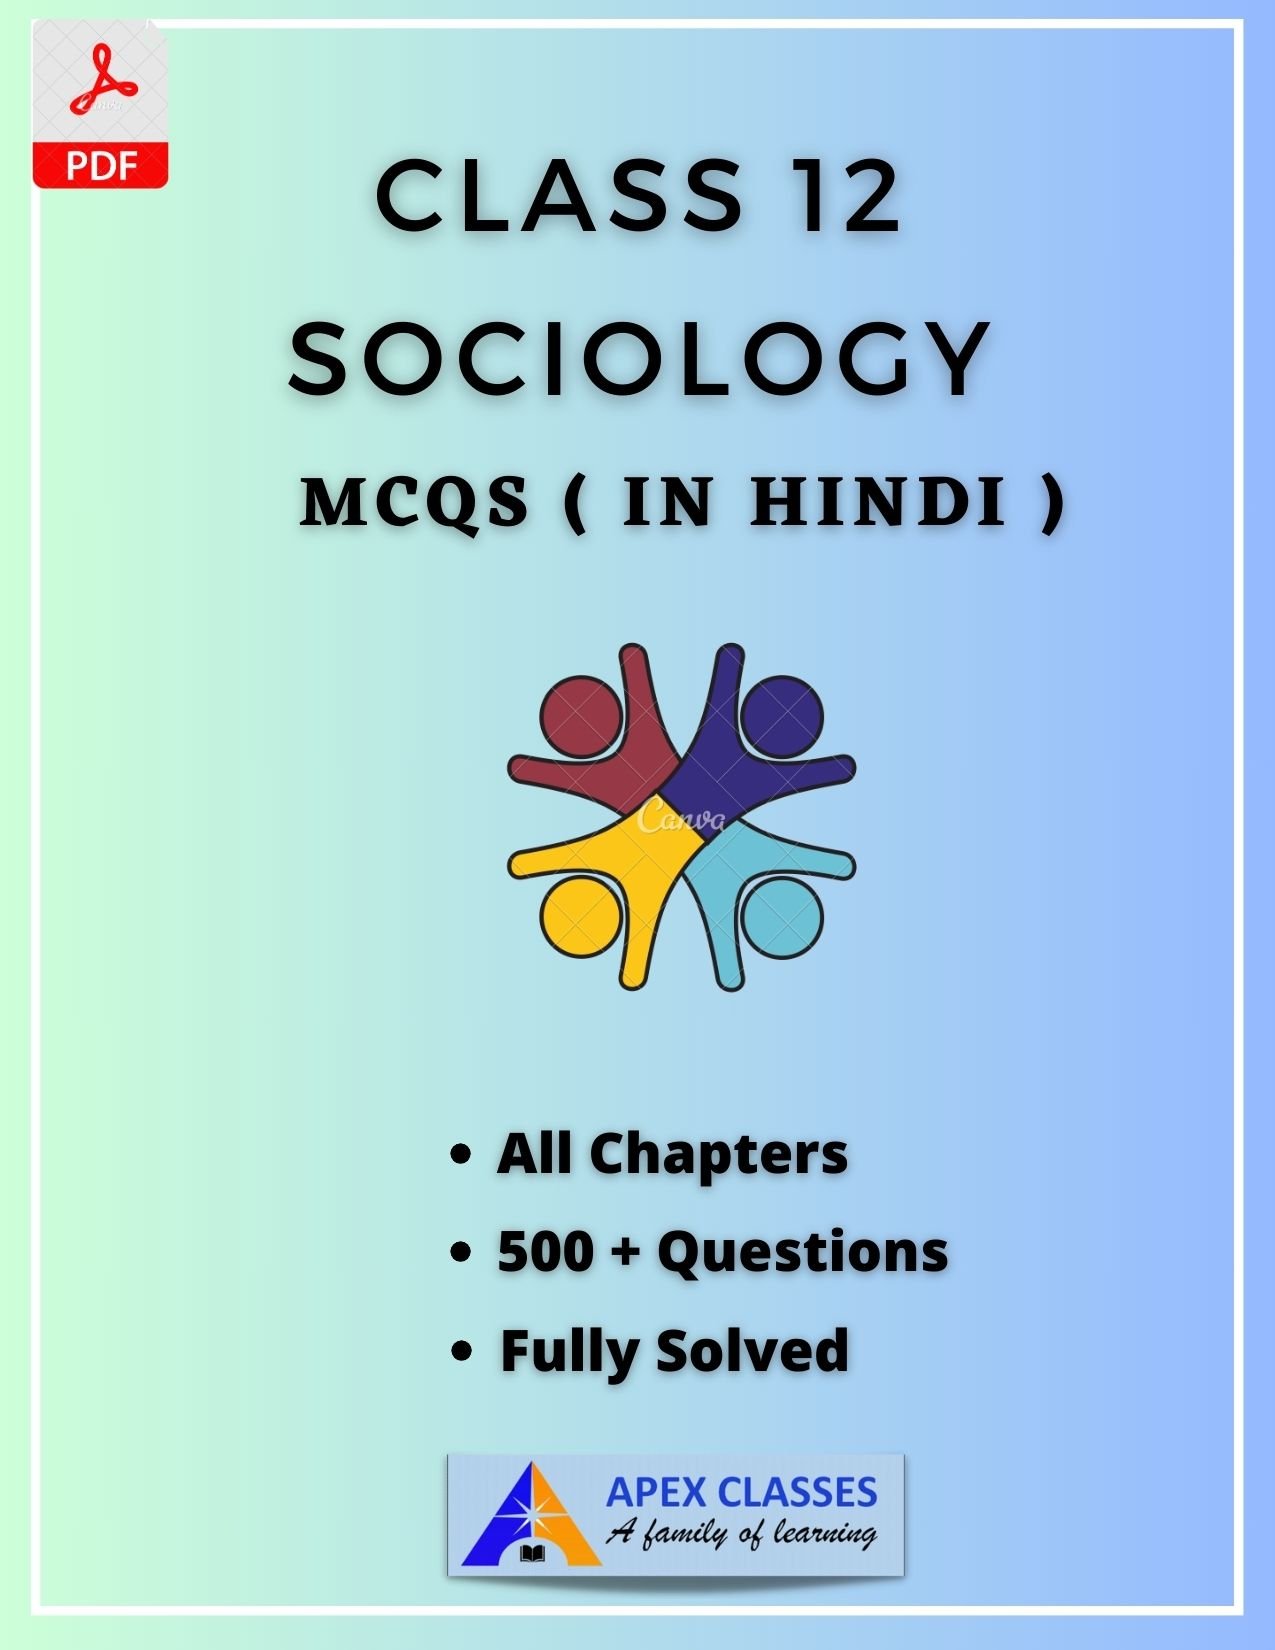 Class 12 Sociology MCQs in Hindi All Chapters PDF